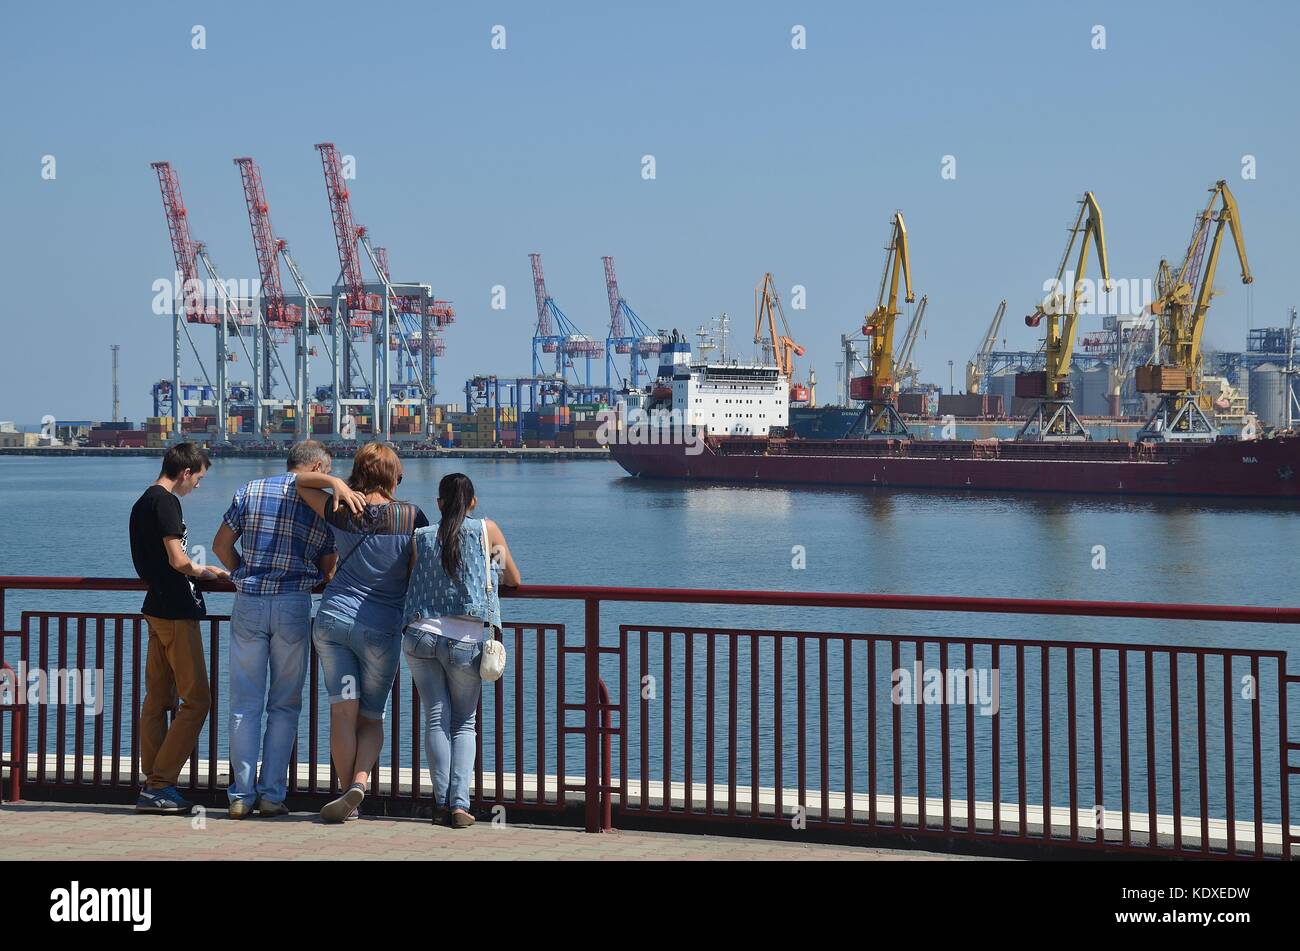 A family standing at the Harbour of Odessa, Ukraine Stock Photo